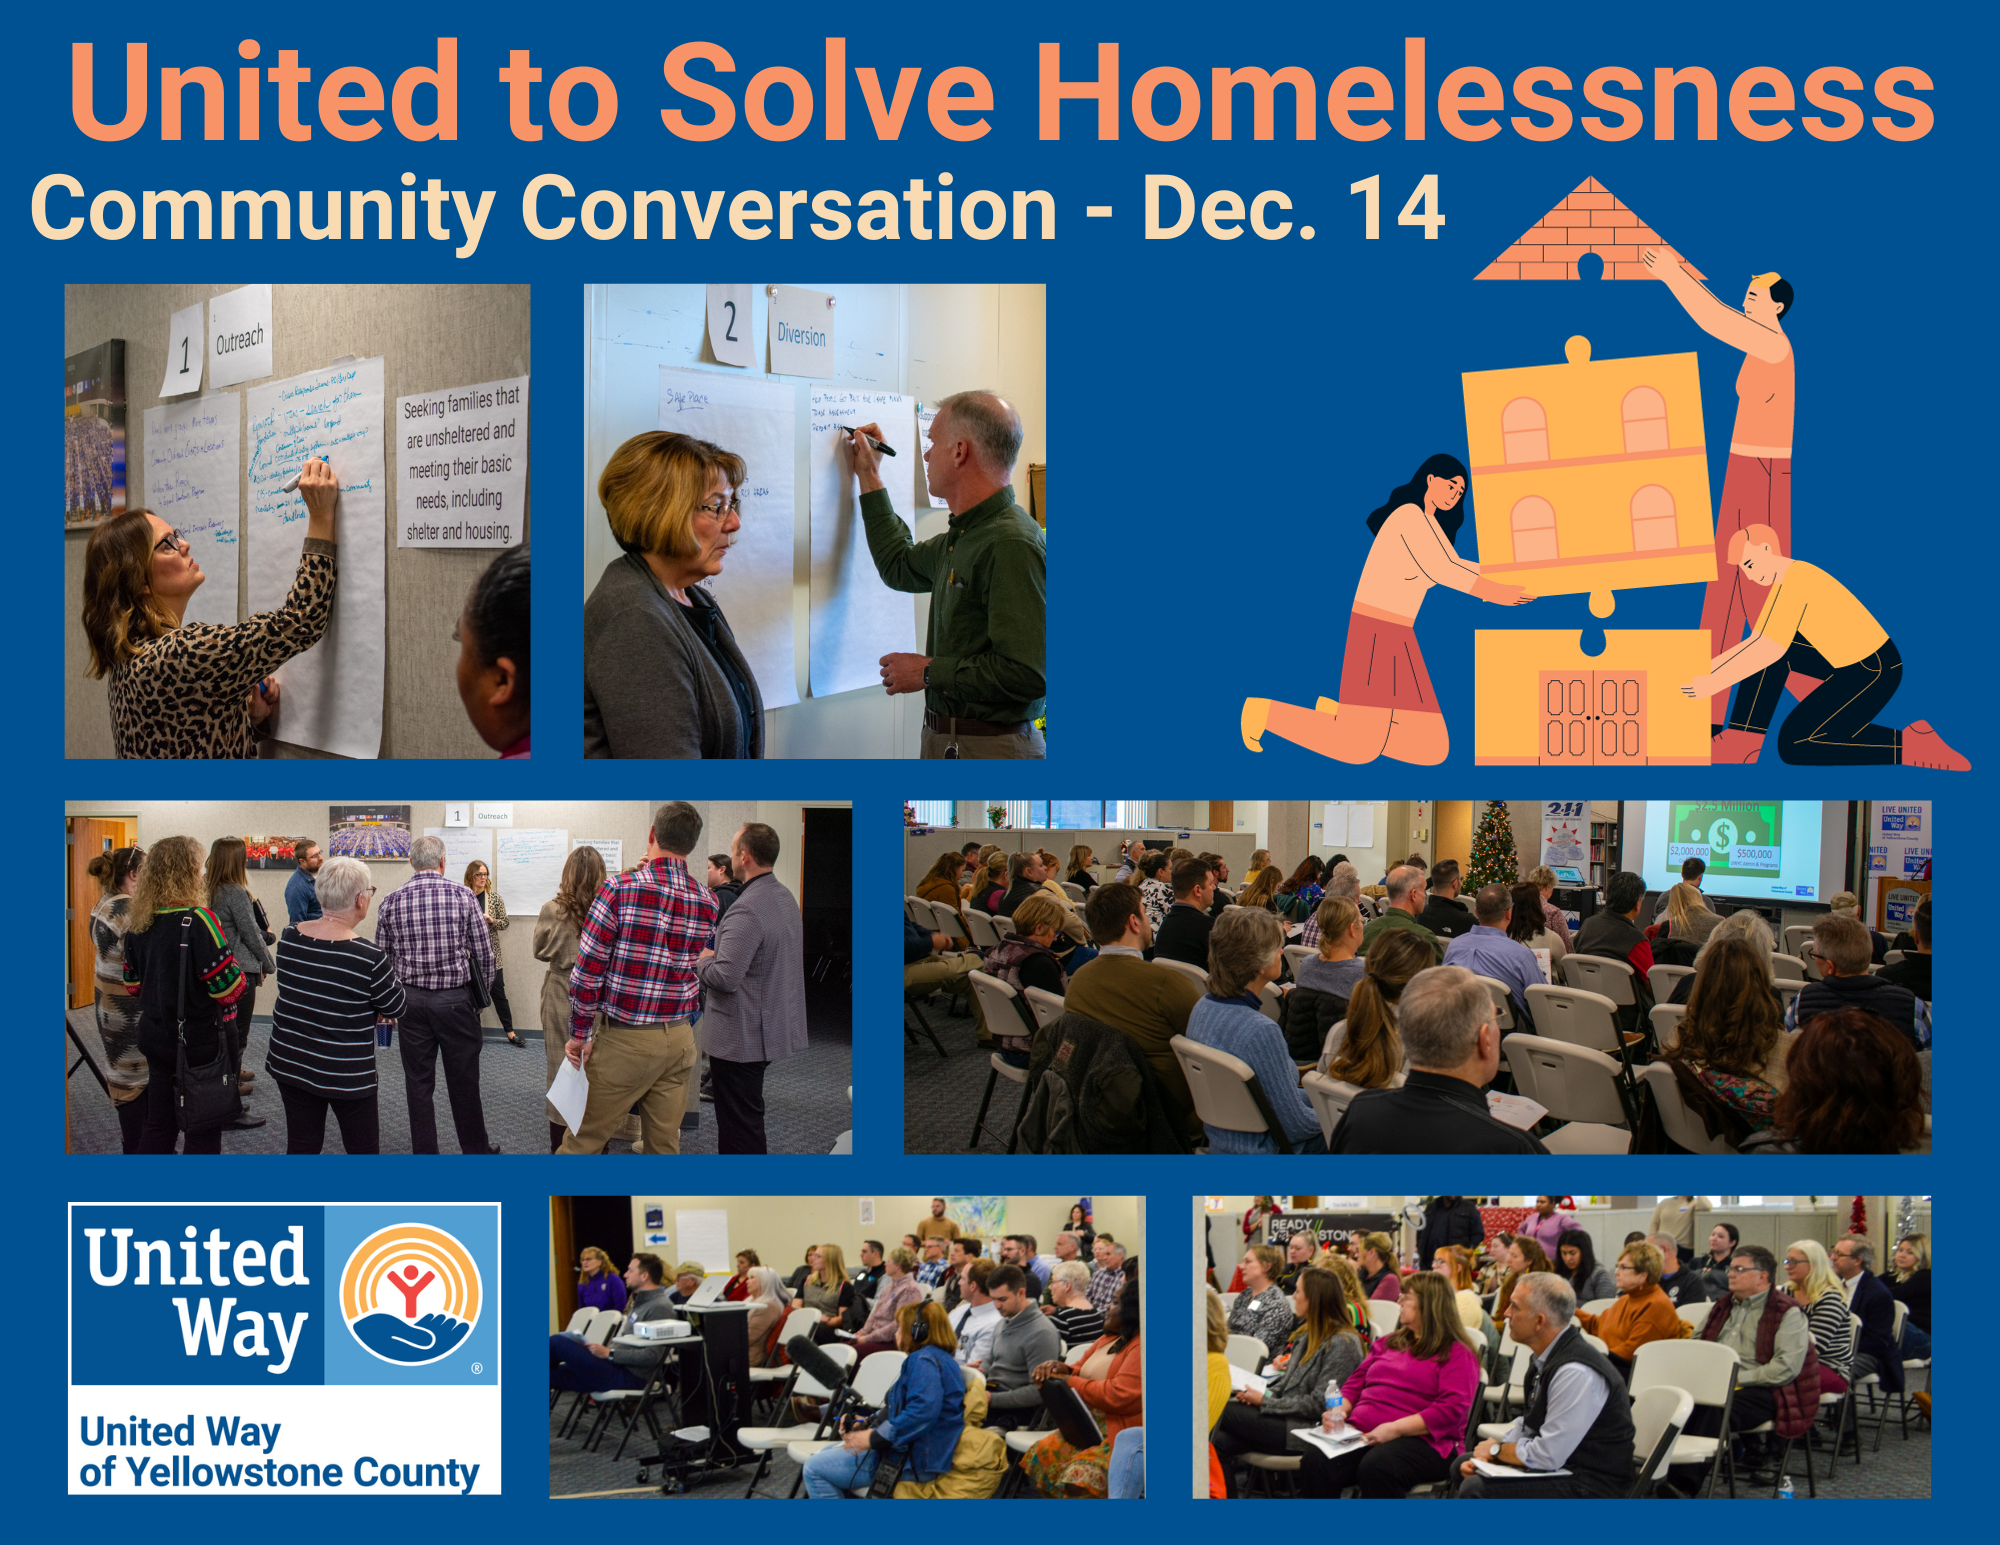 United to Solve Homelessness Image